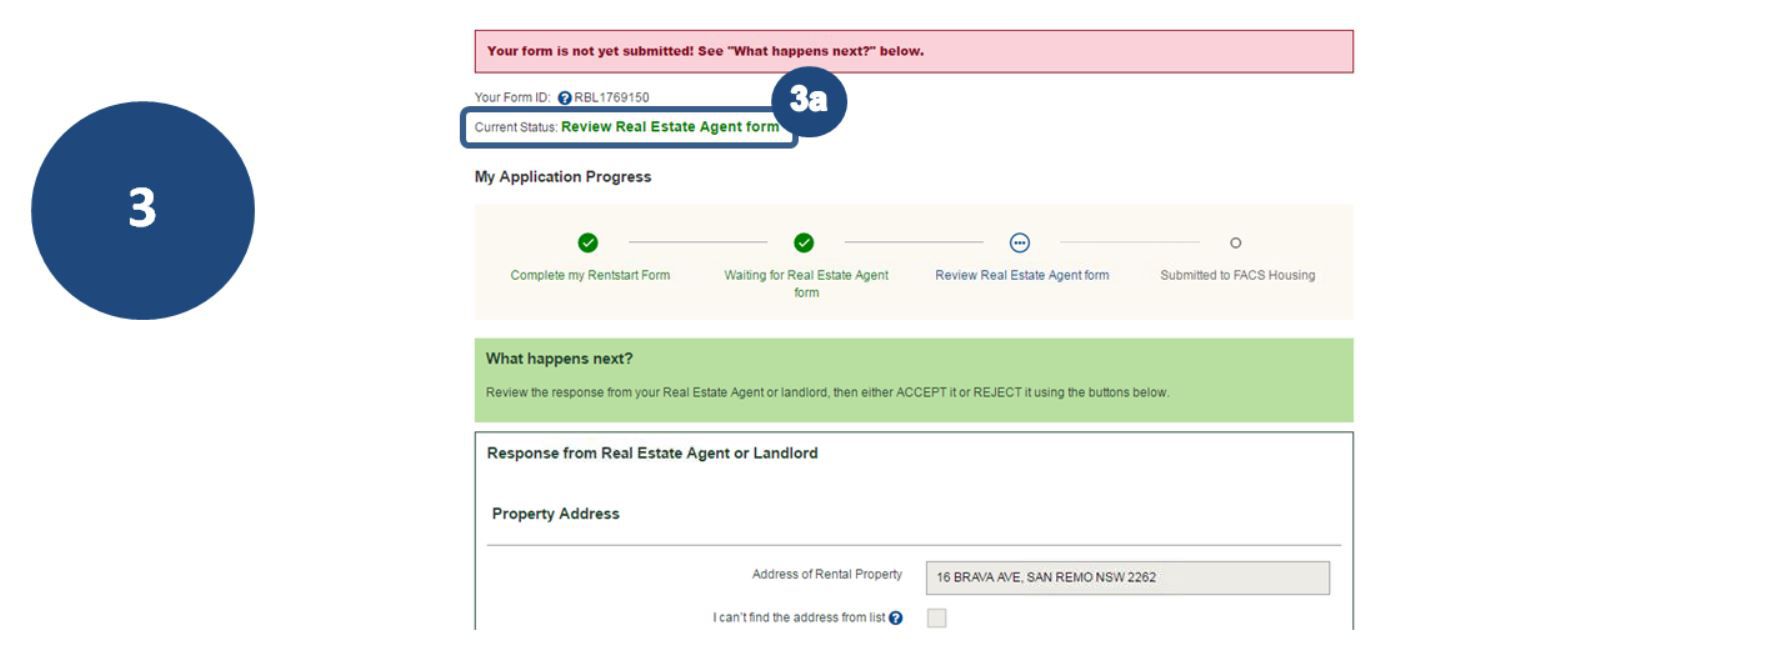 3a. If your application status is Review Real Estate Agent form